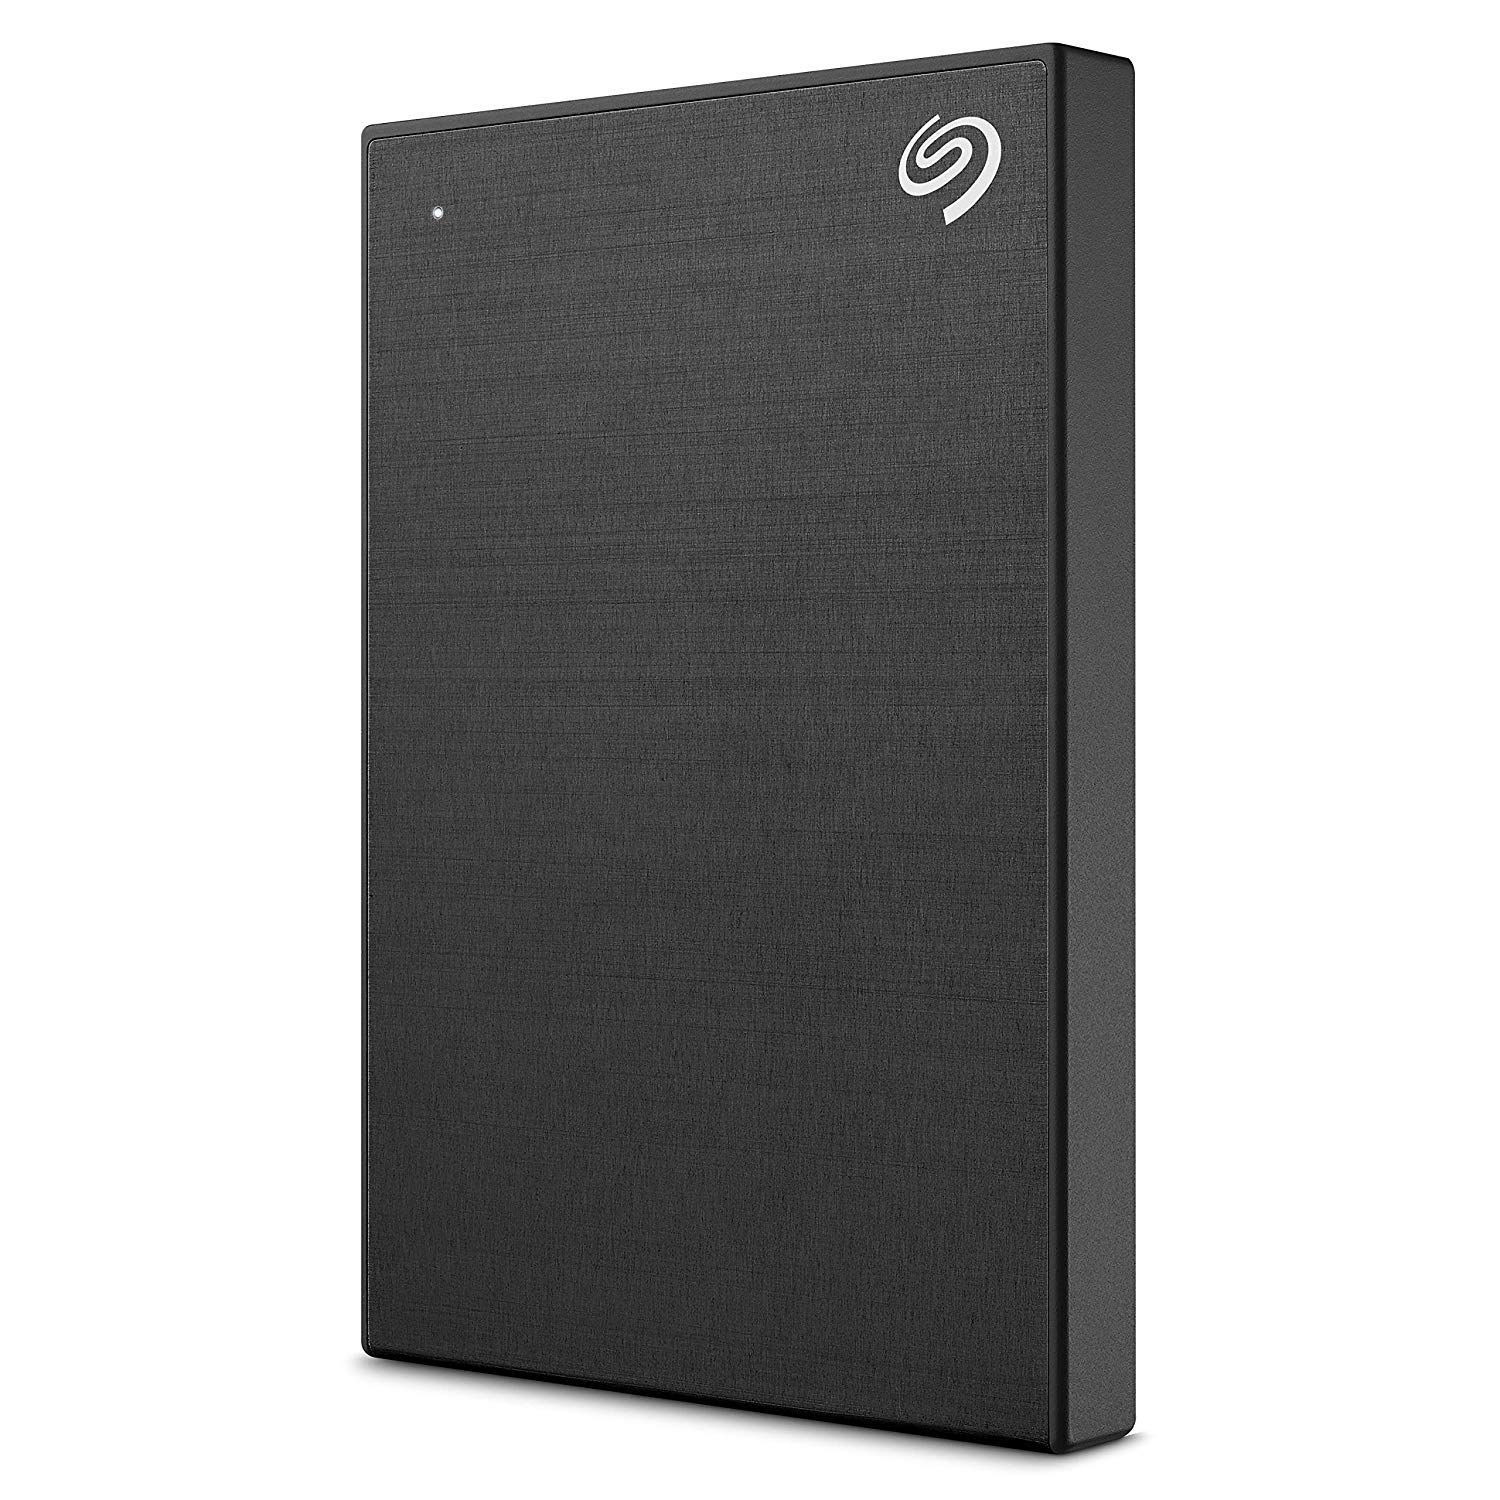 divide seagate hard drive for for mac and pc